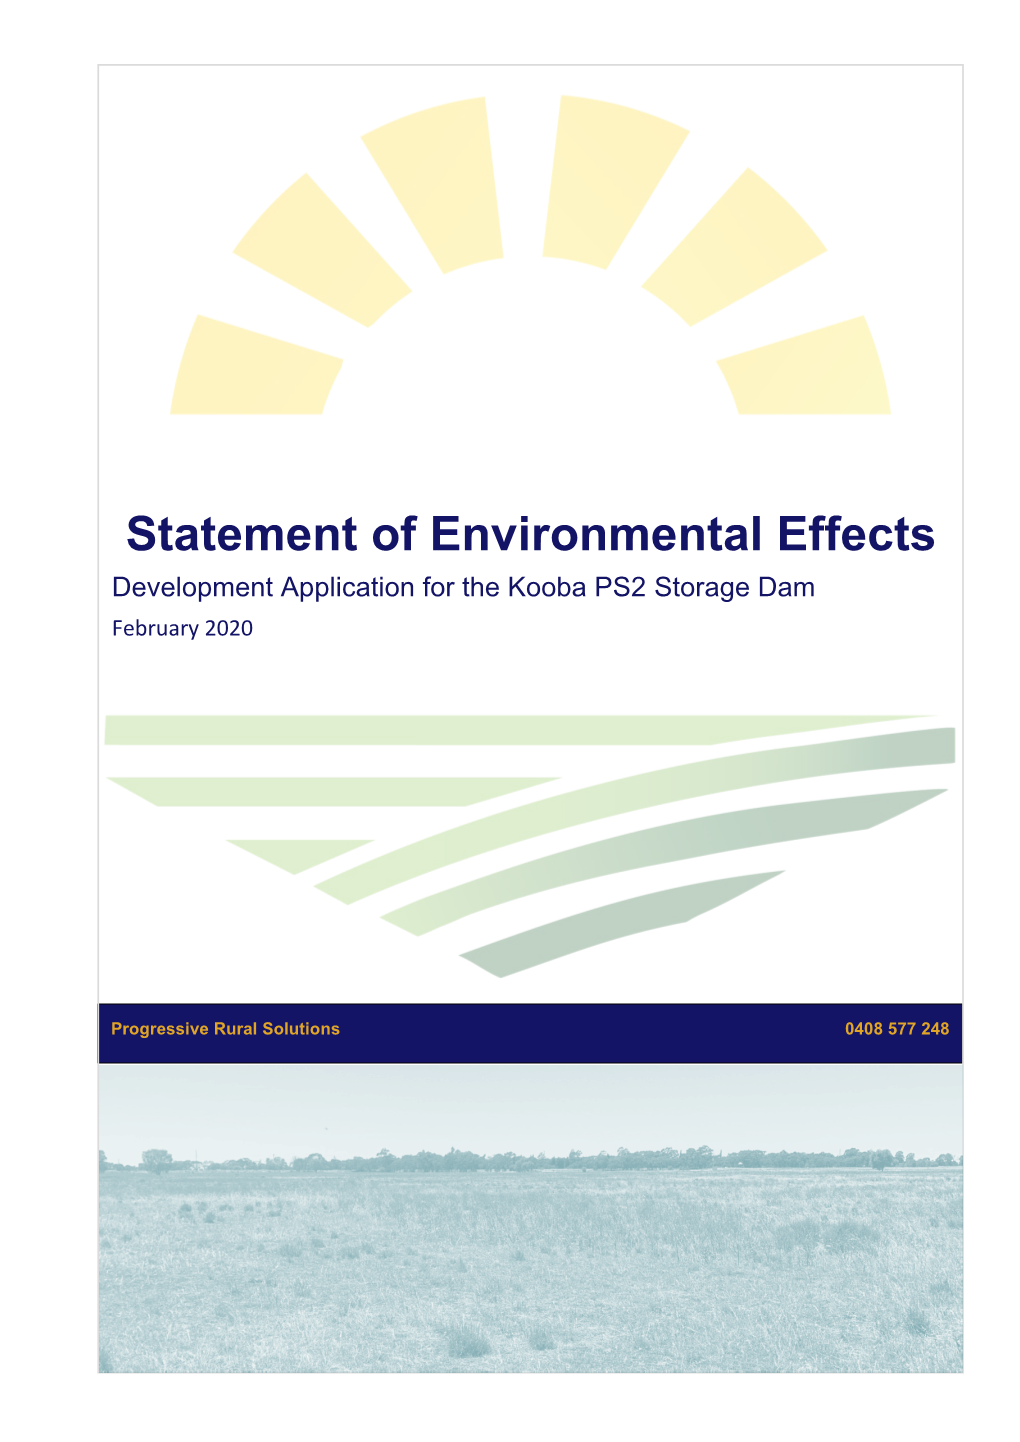 Statement of Environmental Effects Development Application for the Kooba PS2 Storage Dam